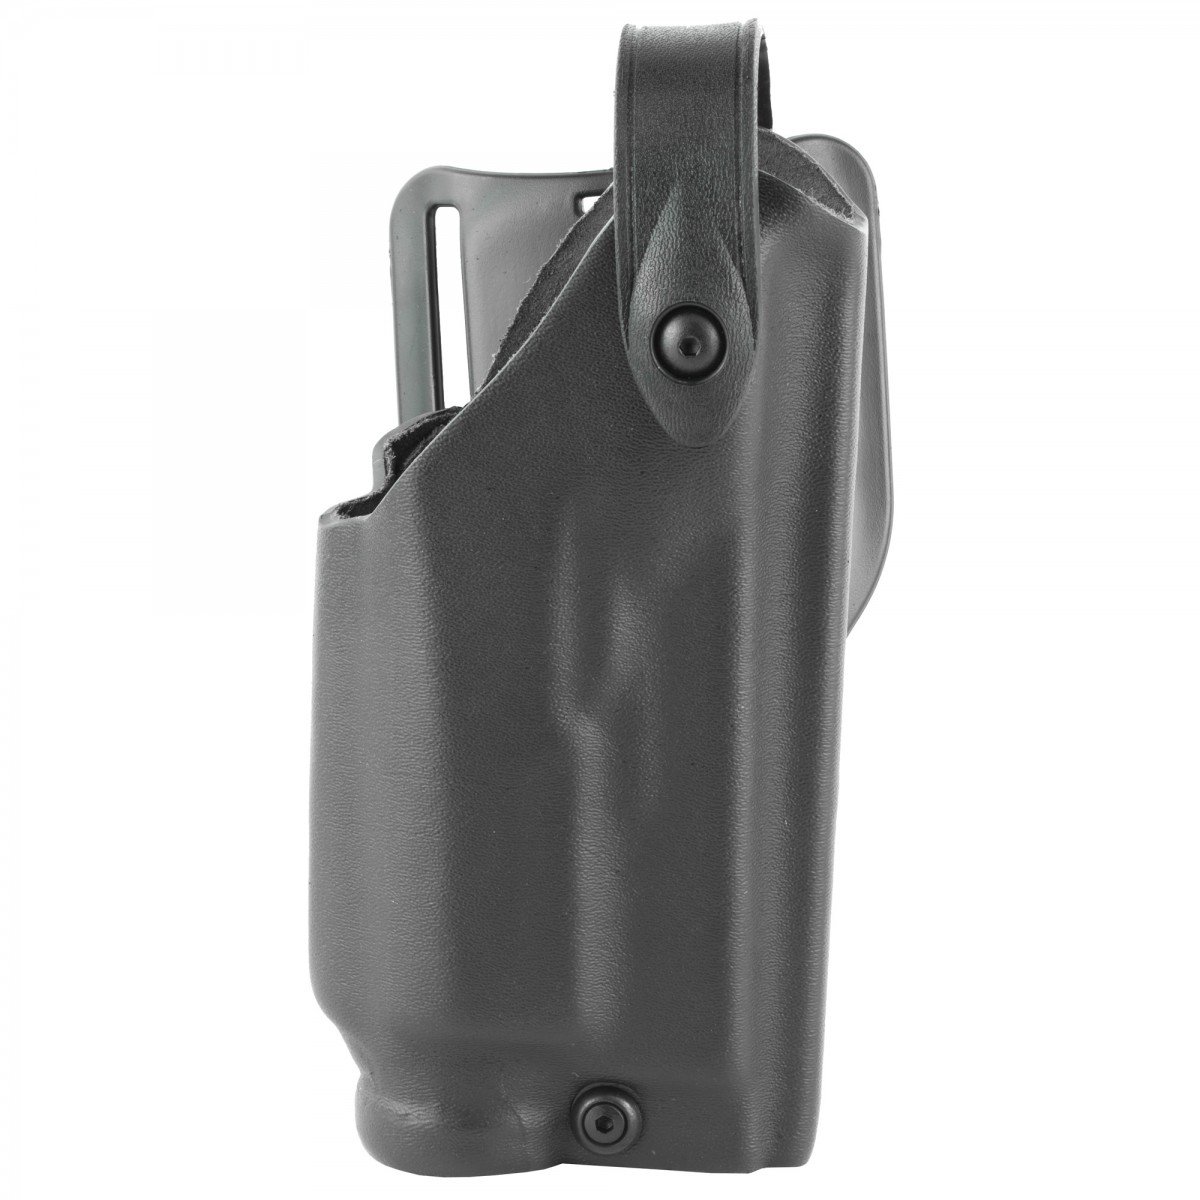 safariland-6280-mid-ride-holster-for-glock-17-22-19-23-pistols-with